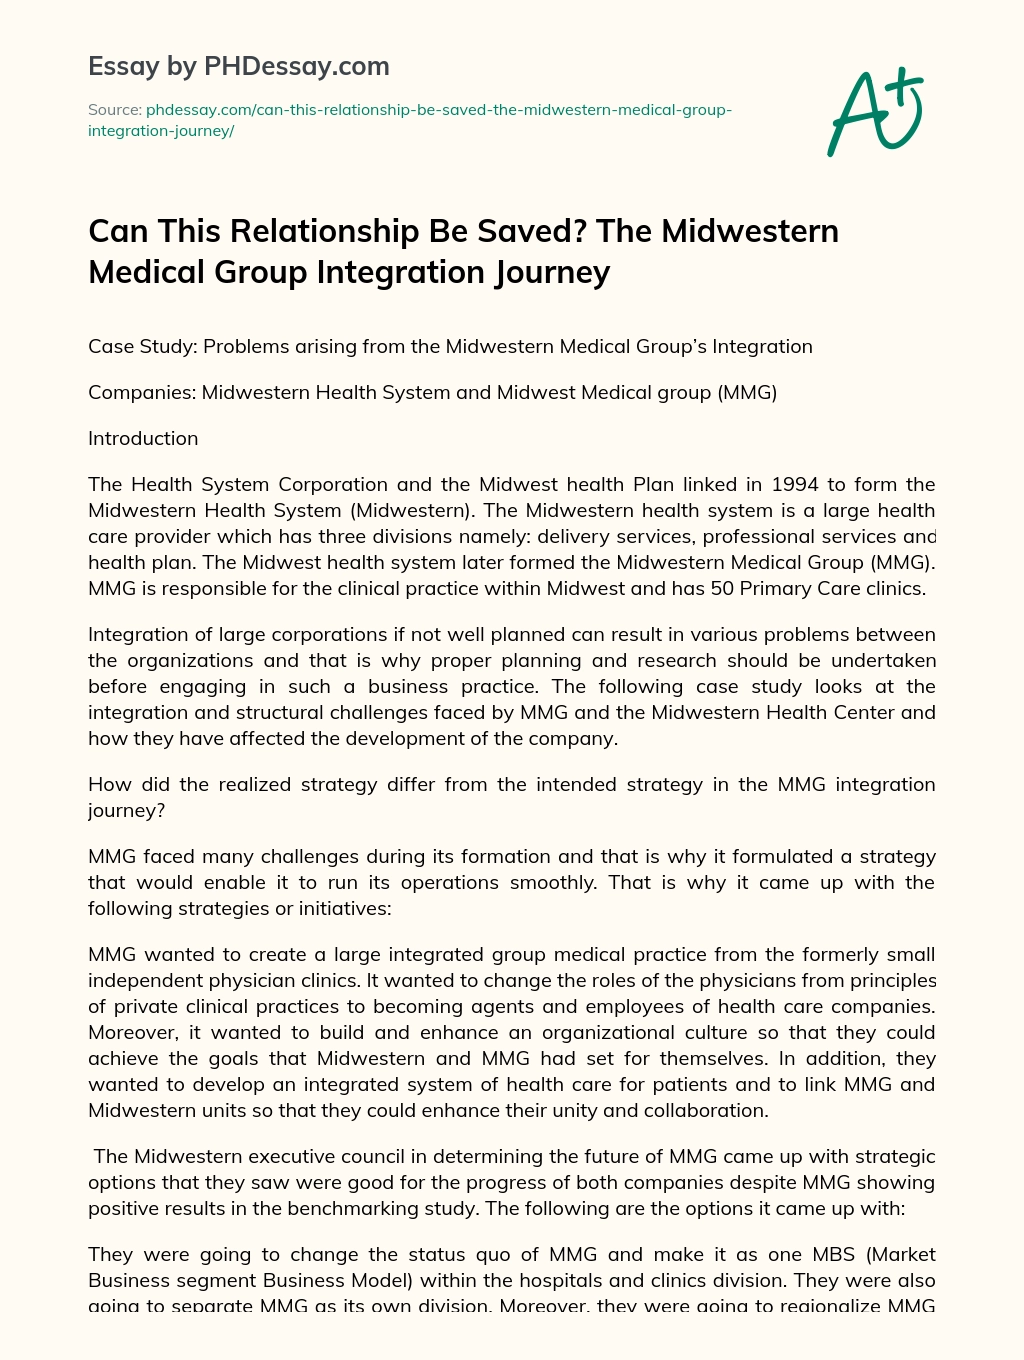 Can This Relationship Be Saved? The Midwestern Medical Group Integration Journey essay